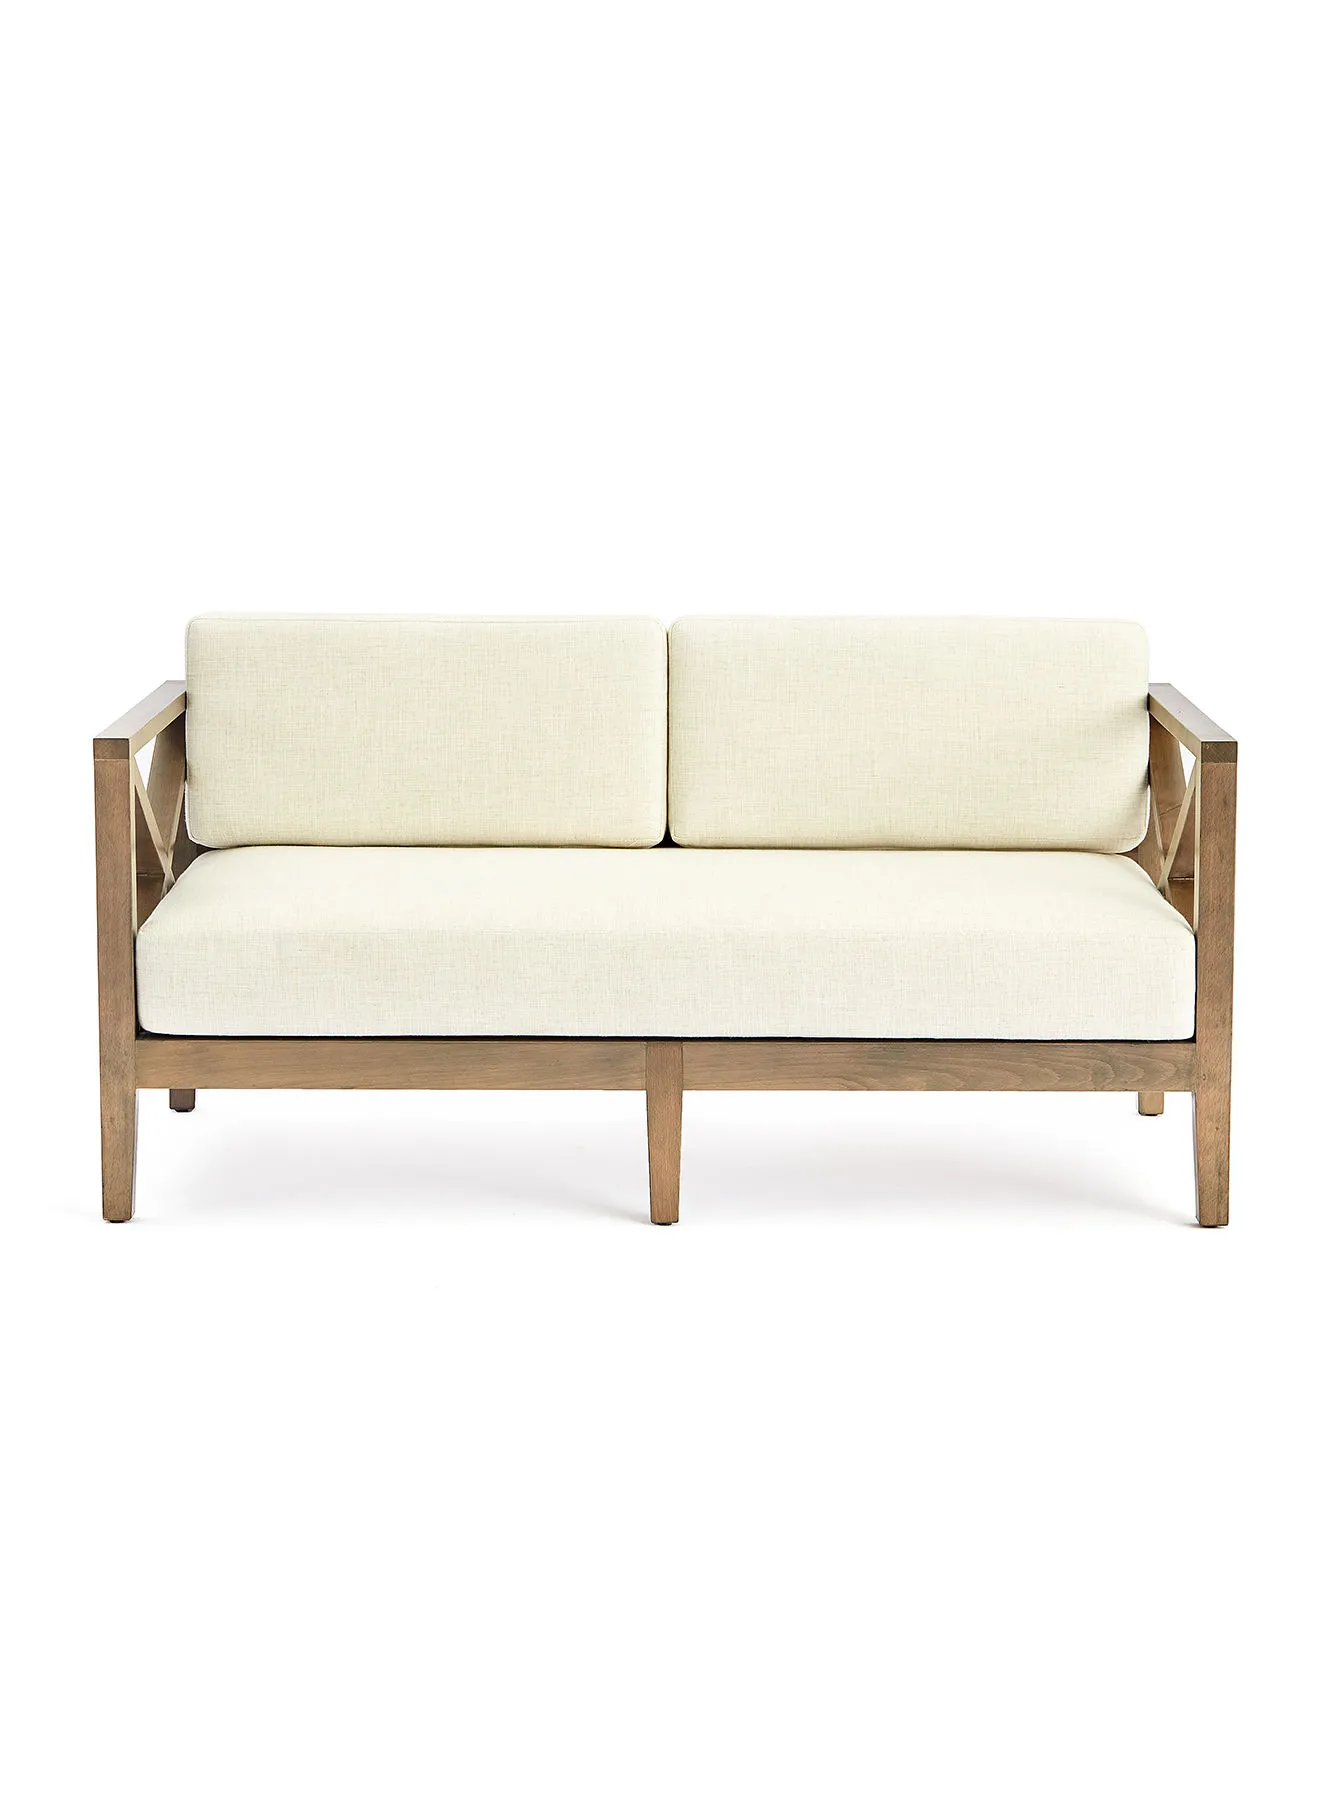 ebb & flow Sofa Luxurious - Cream/Brown Wood Couch - 1380 X 700 X 705 - 2 Seater Sofa Relaxing Sofa